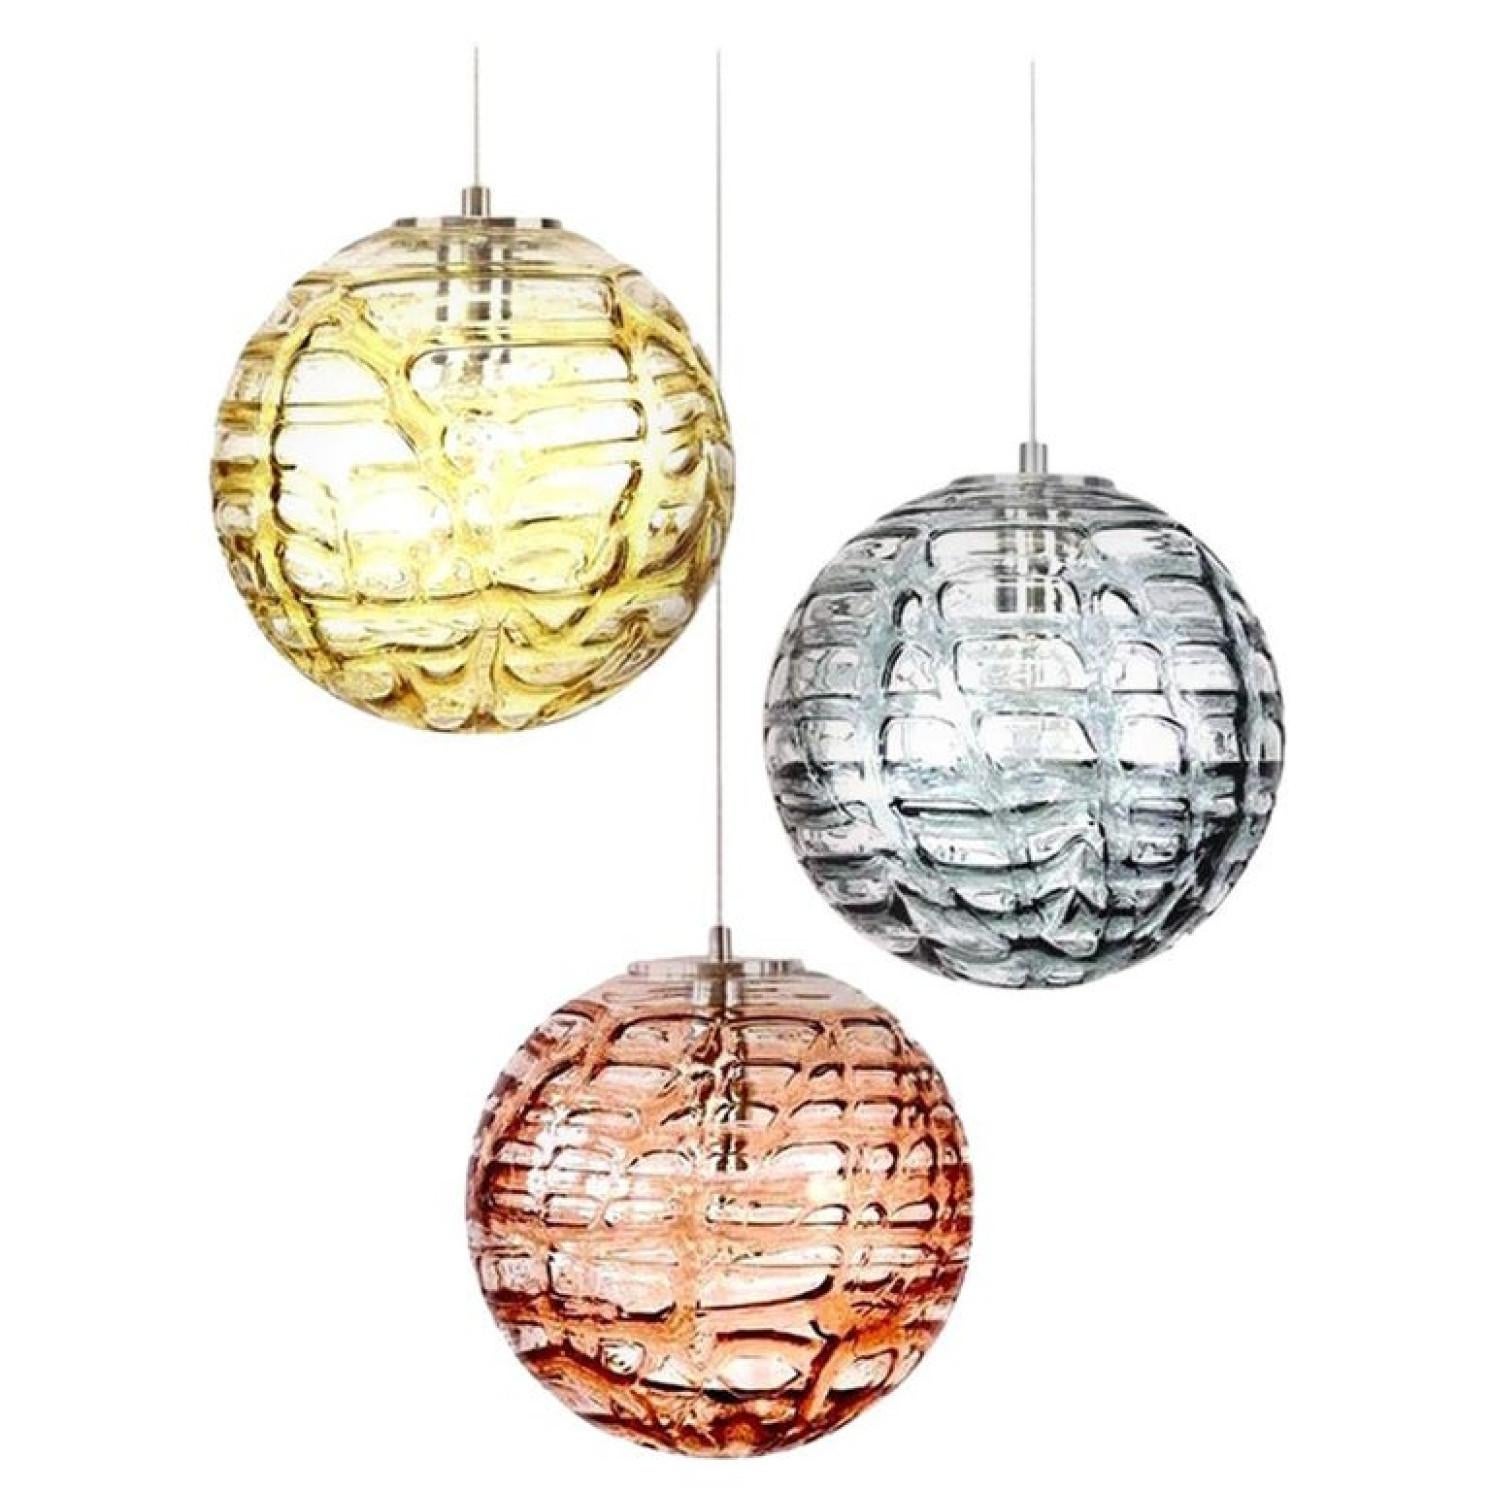 Set of 3 Doria pendant lights (in collaboration with Murano) in the style of Venini, manufactured, circa 1960. Real statement pieces. High-end thick Murano crystal glass shade made out of overlay glasses of different colors (pink, amber, grey)